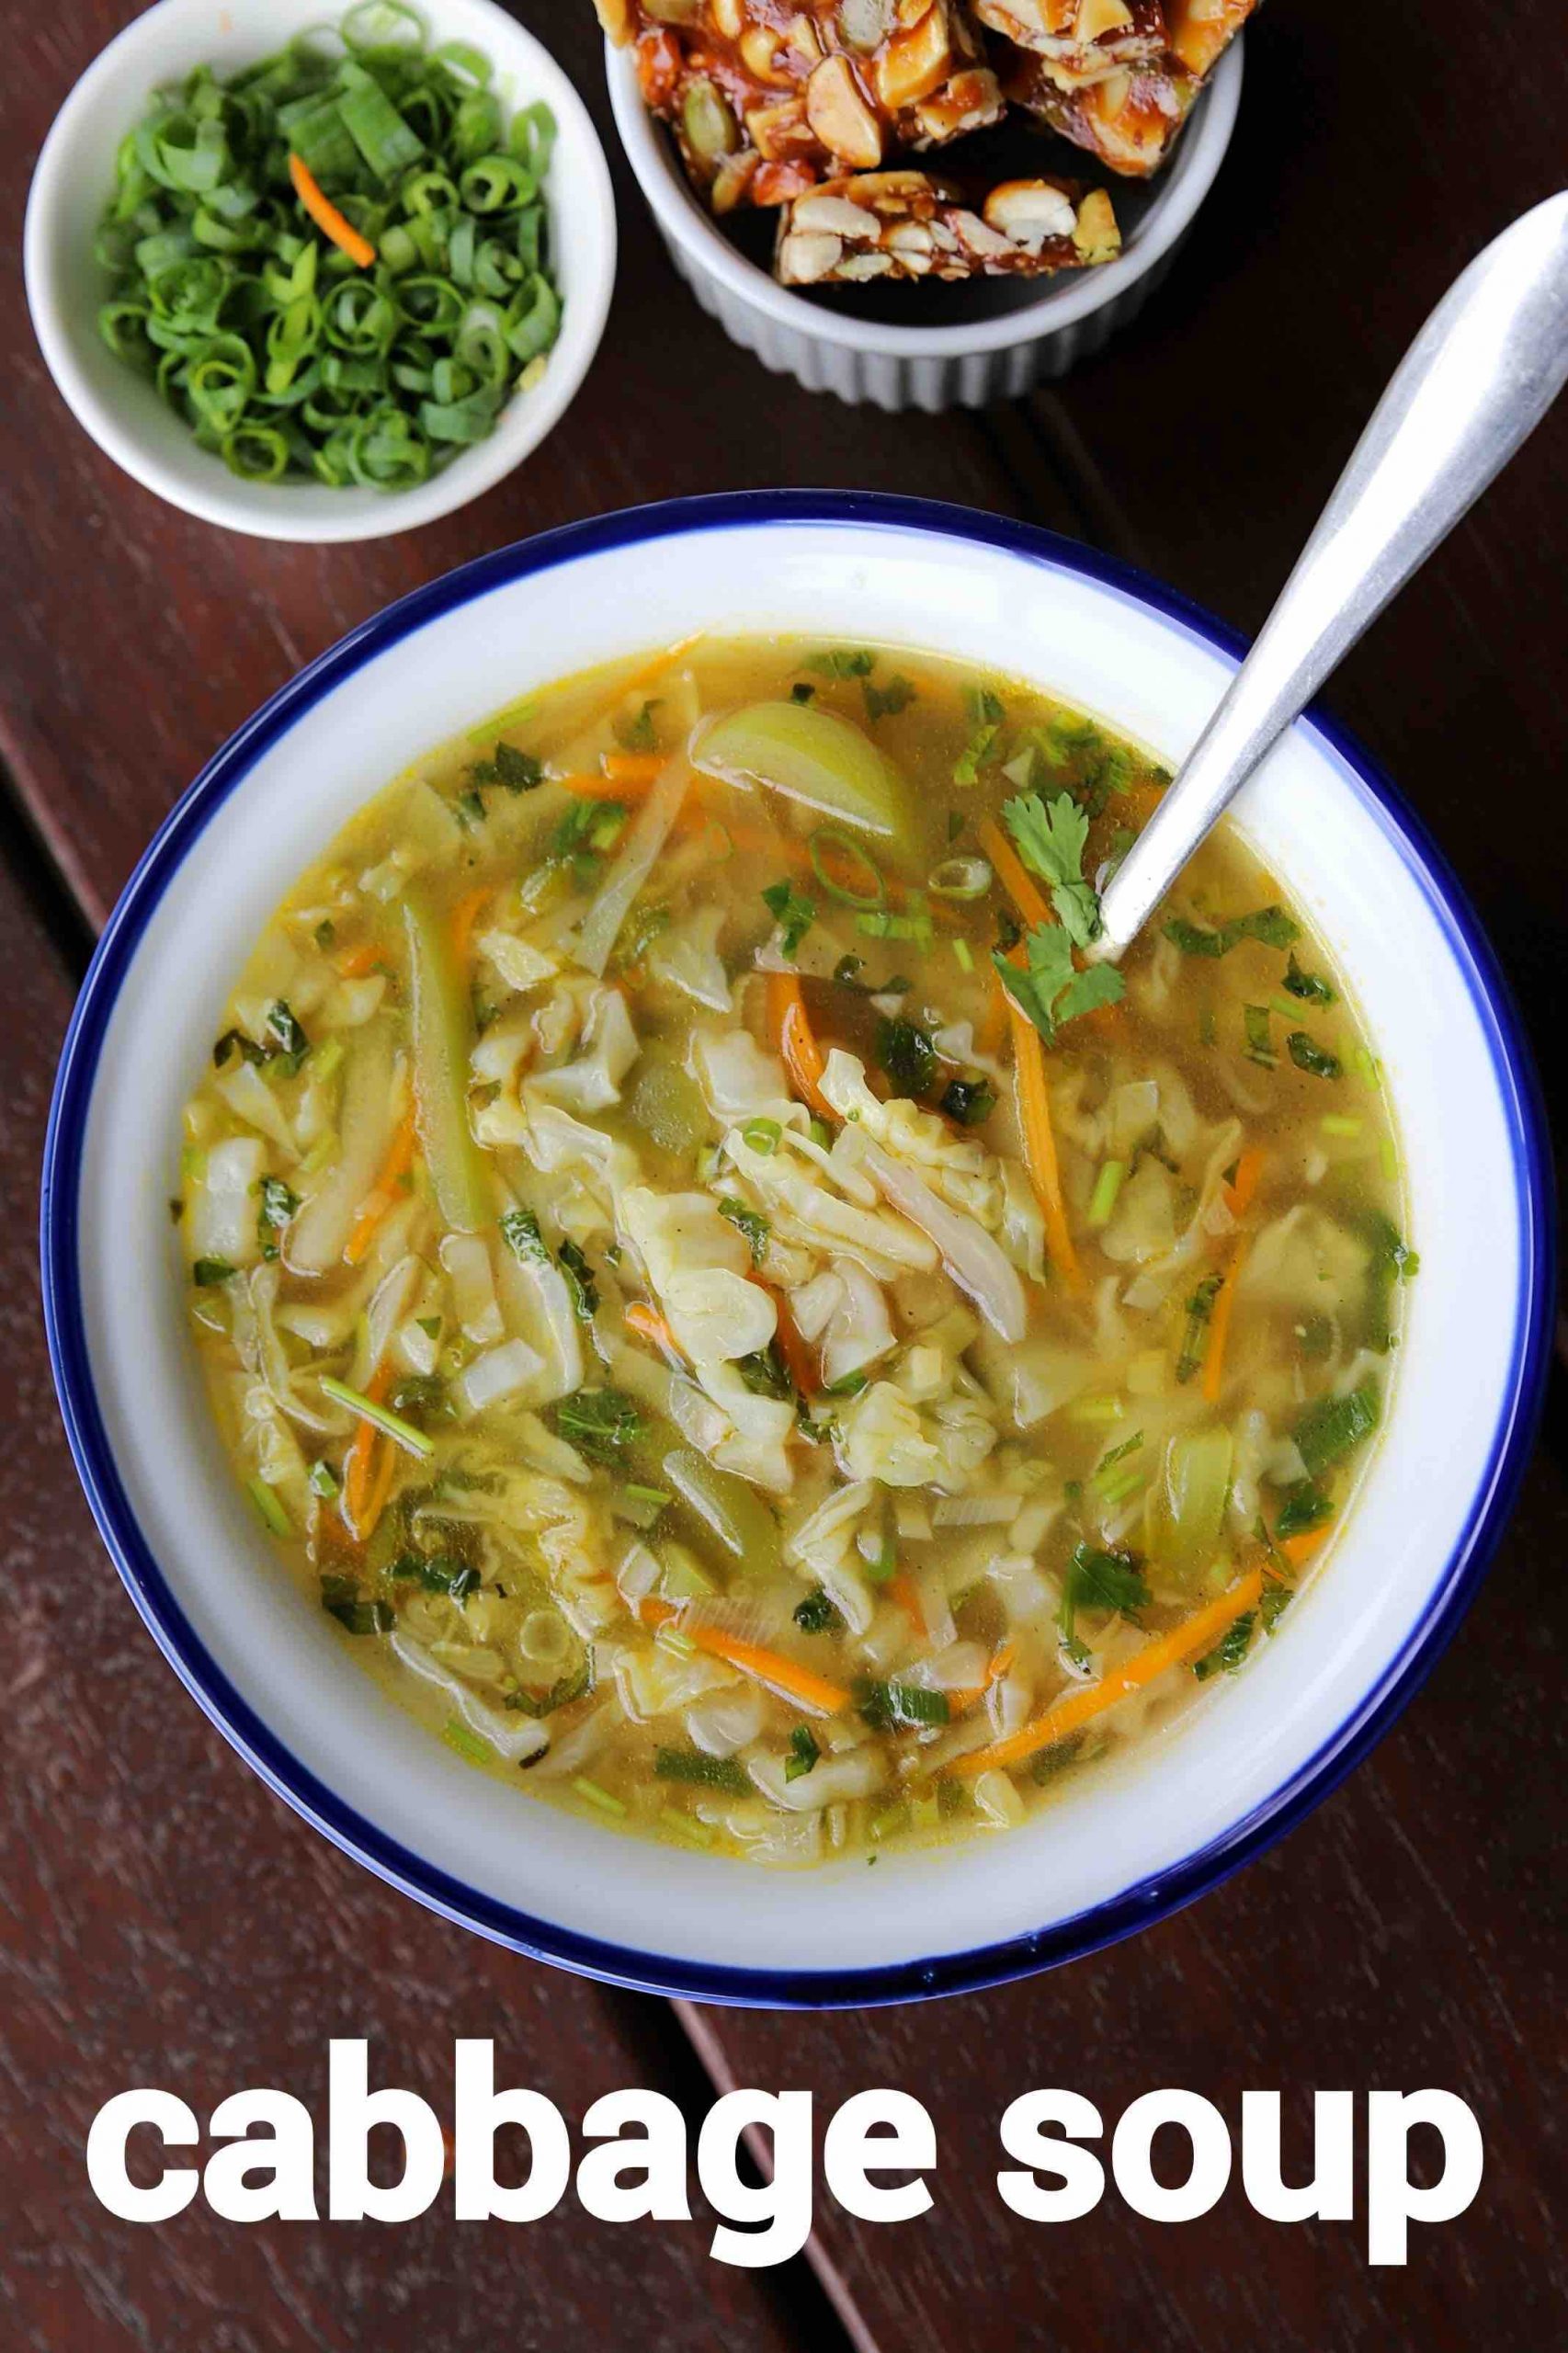 Cabbage Soup Recipe Vegetable Soup With Cabbage Cabbage Soup Diet